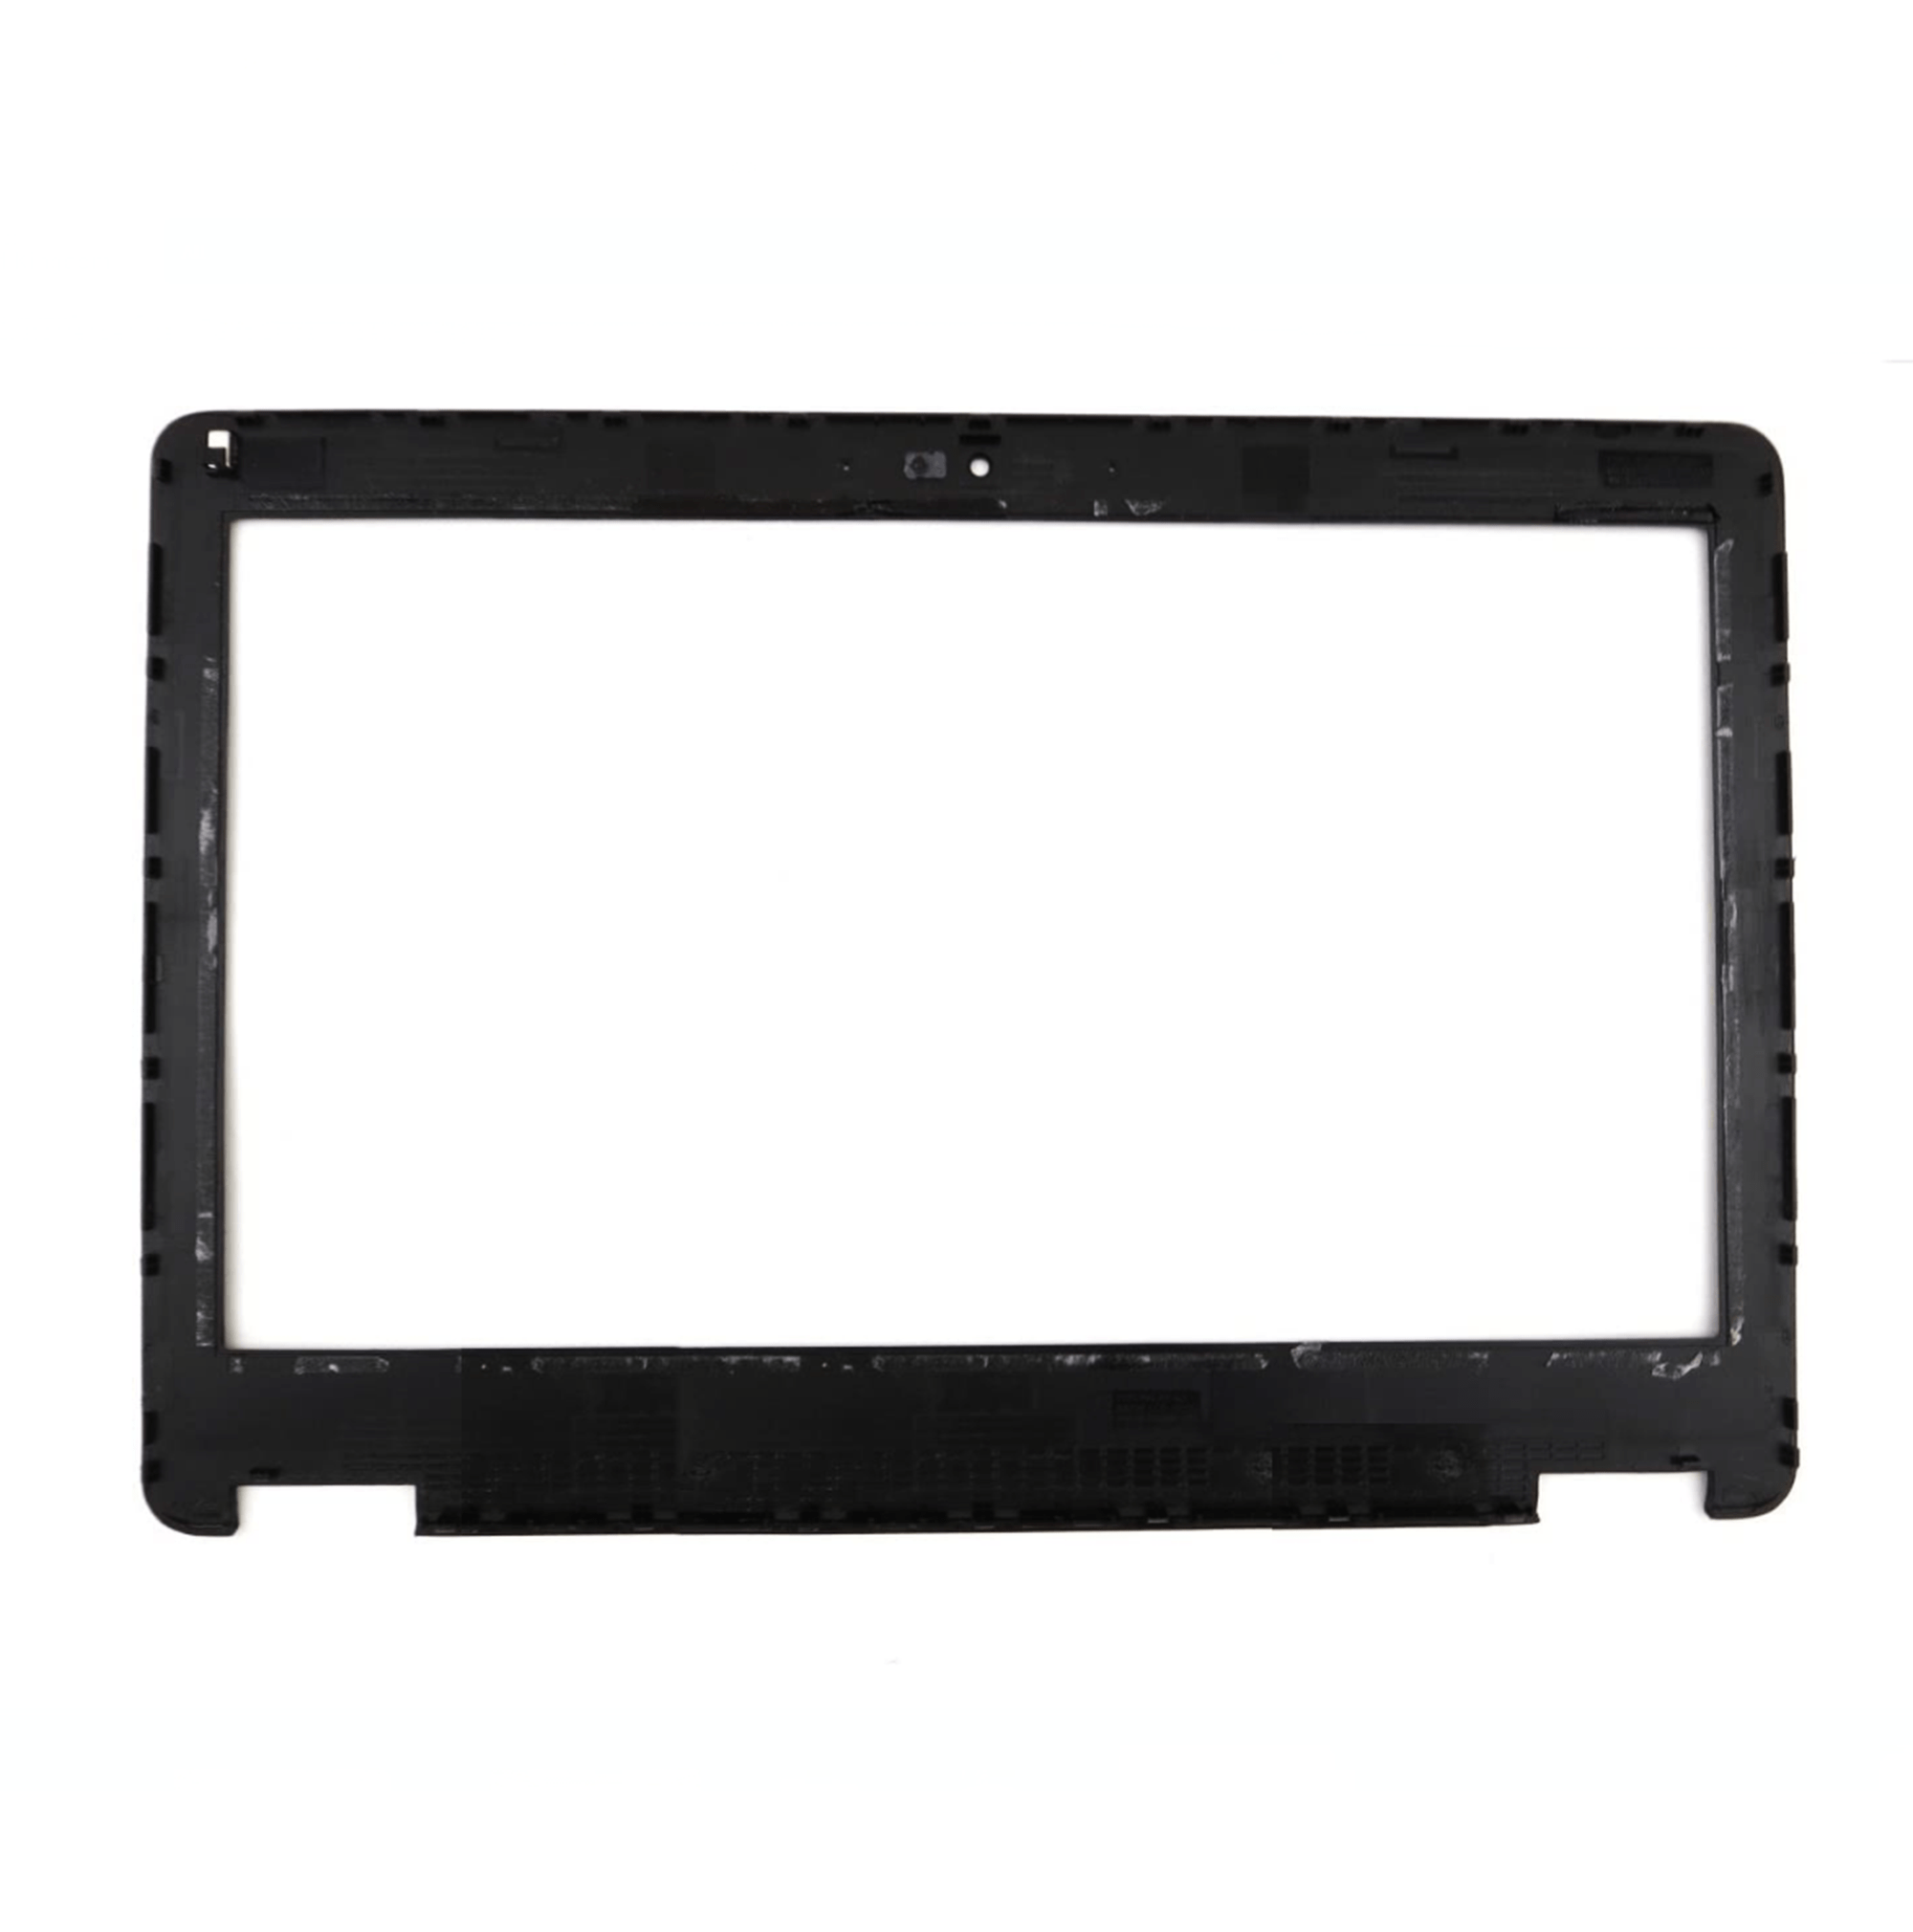 New Dell Latitude E7270 Screen Bezel with Webcam Port 2YPVG | 02YPVG